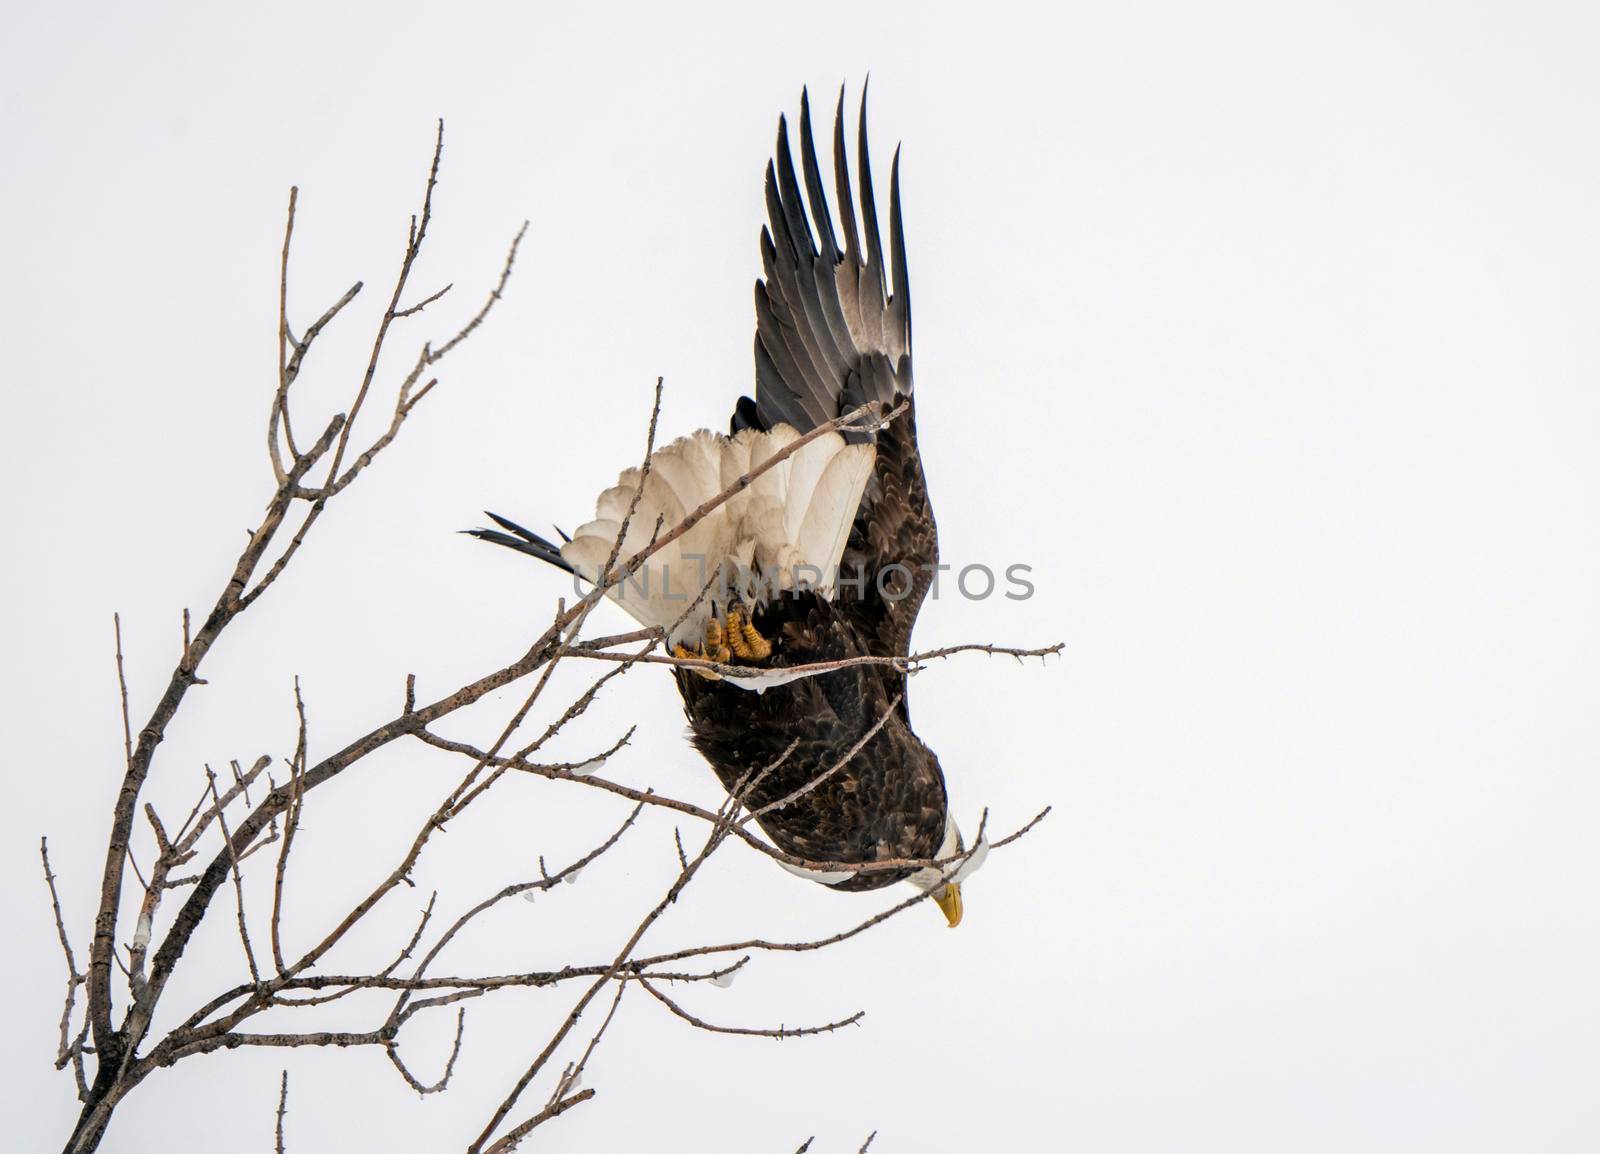 Bald Eagle in Flight by pictureguy